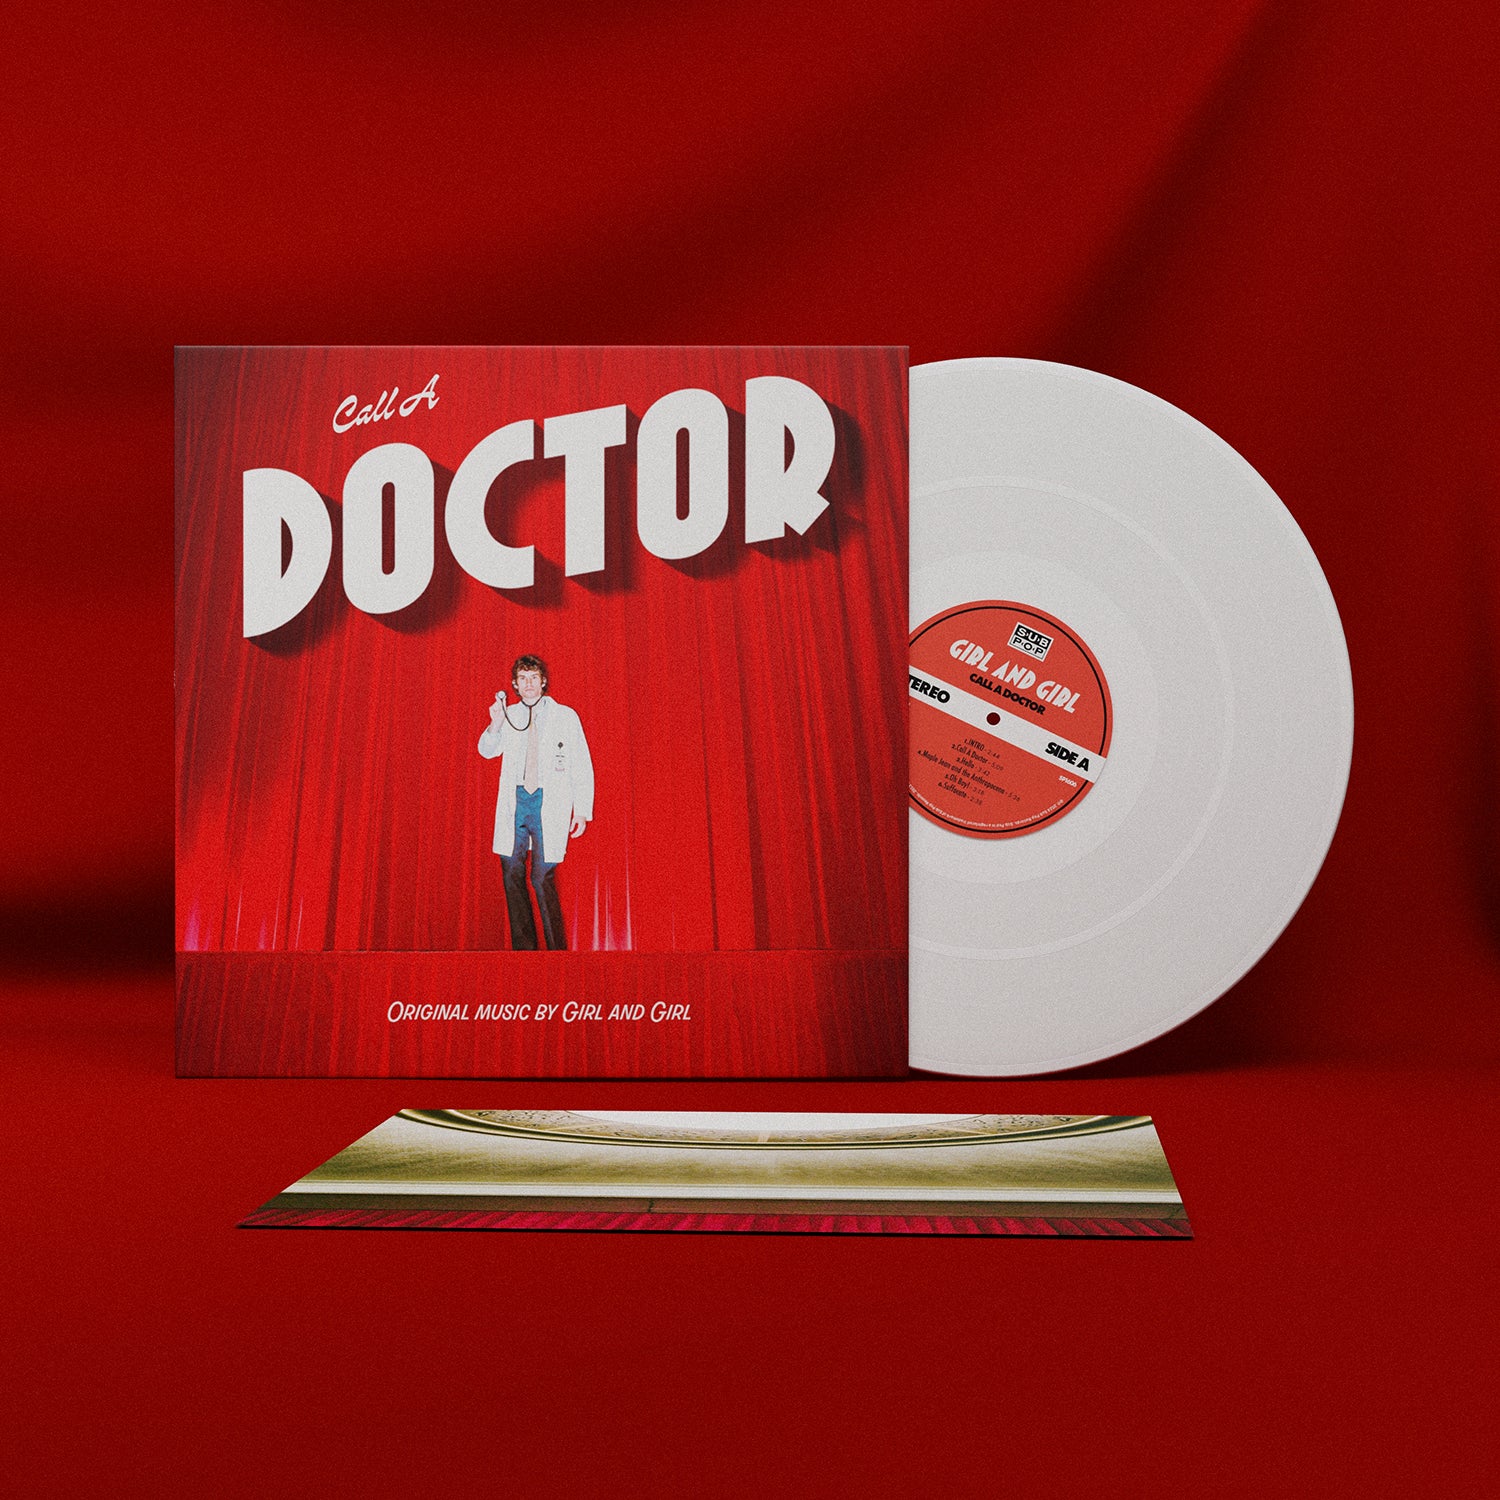 Girl and Girl - Call A Doctor: Limited Loser White Vinyl LP